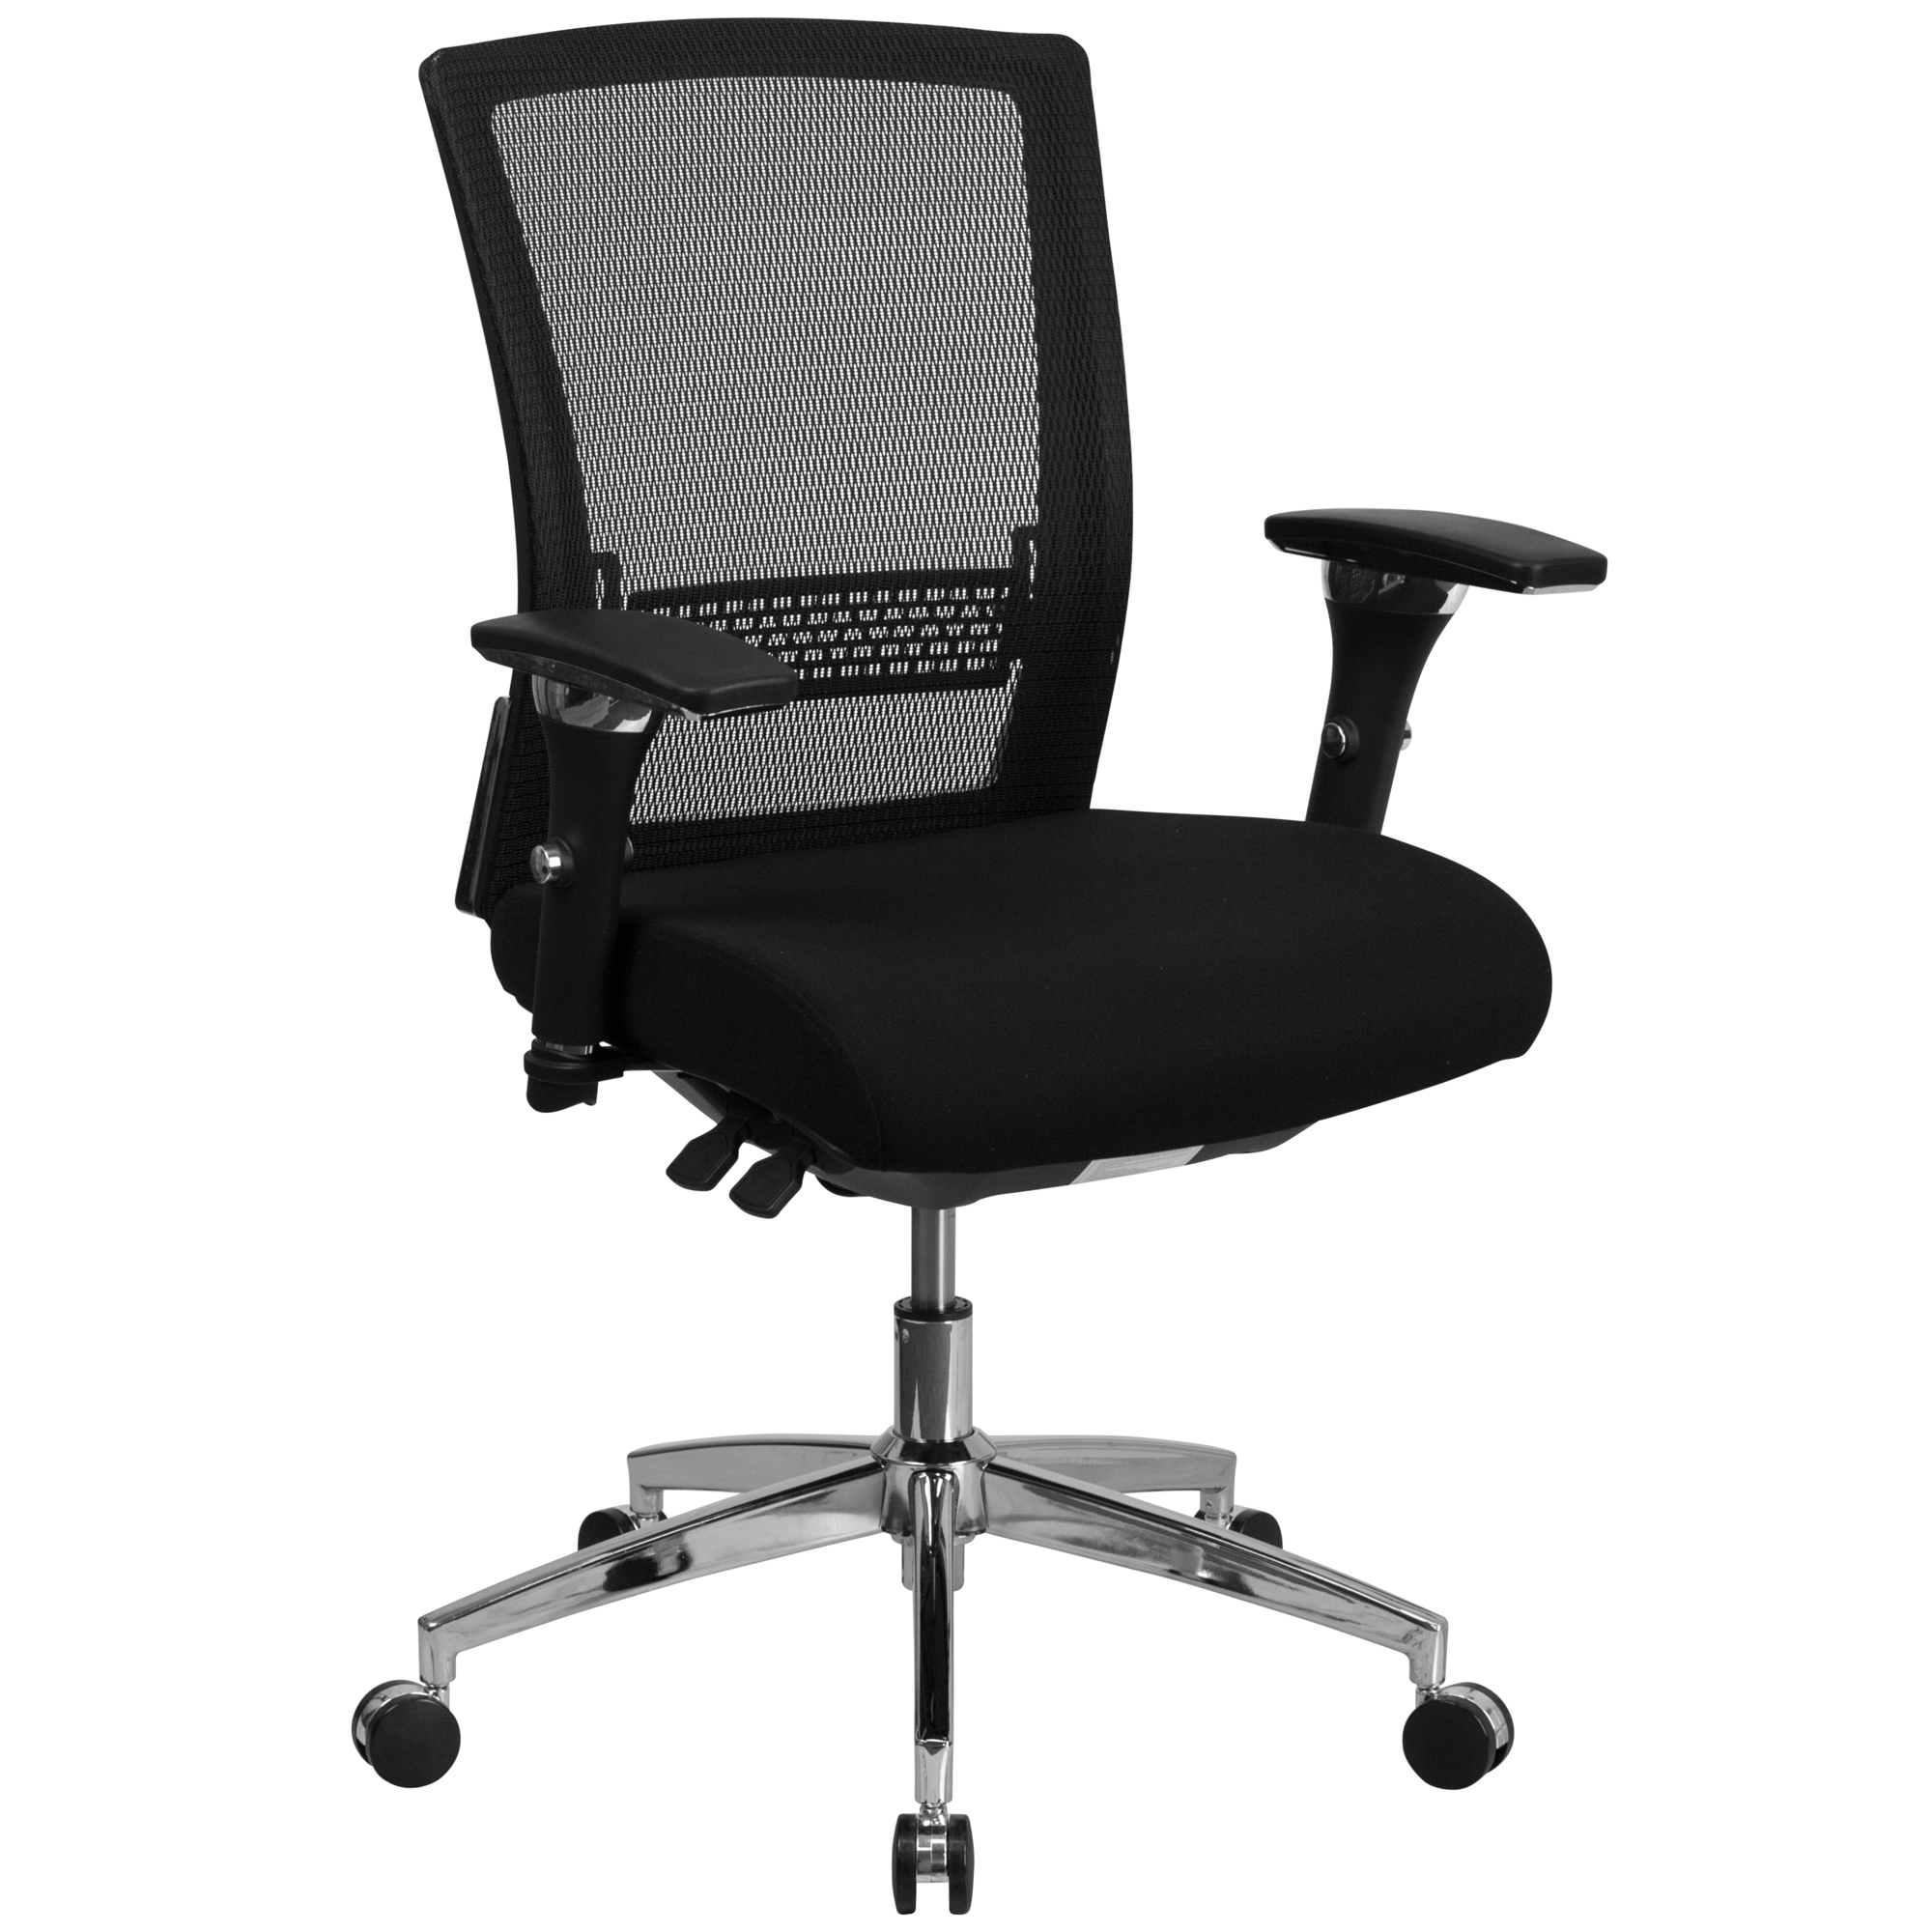 Flash Furniture, 24/7 300 lb. Rated Mid-Back Black Mesh Chair, Primary Color Black, Included (qty.) 1, Model GOWY858